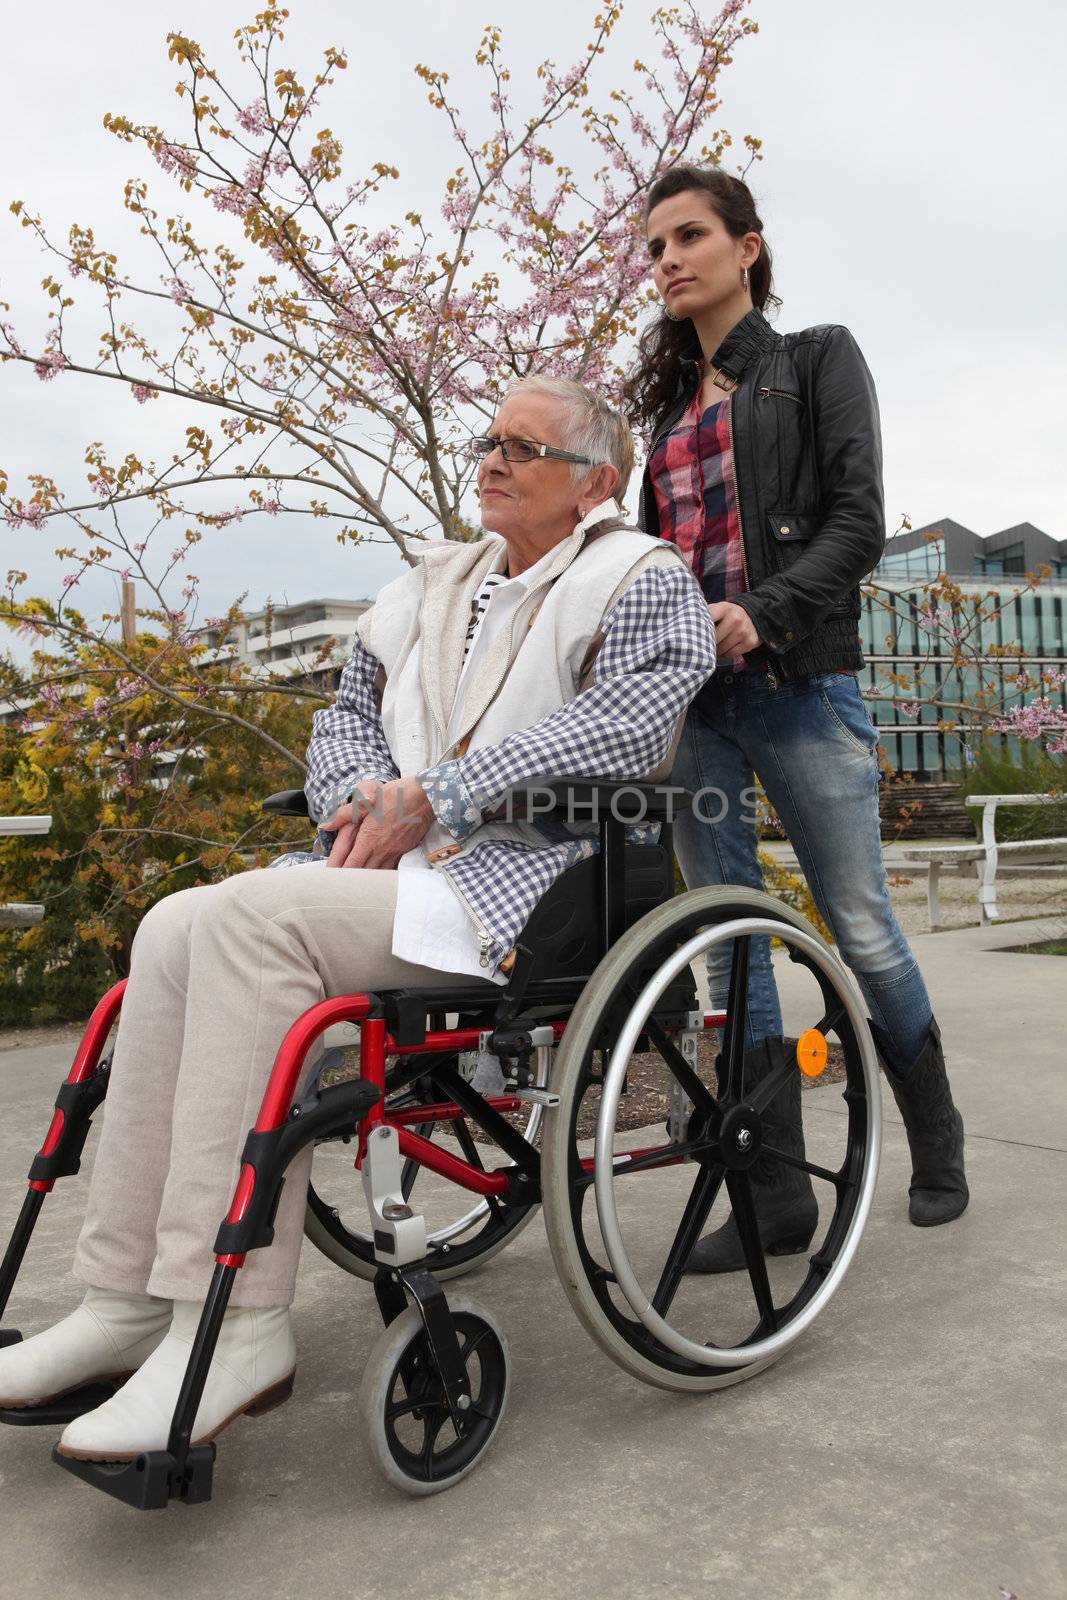 Young woman pushing an elderly lady in a wheelchair